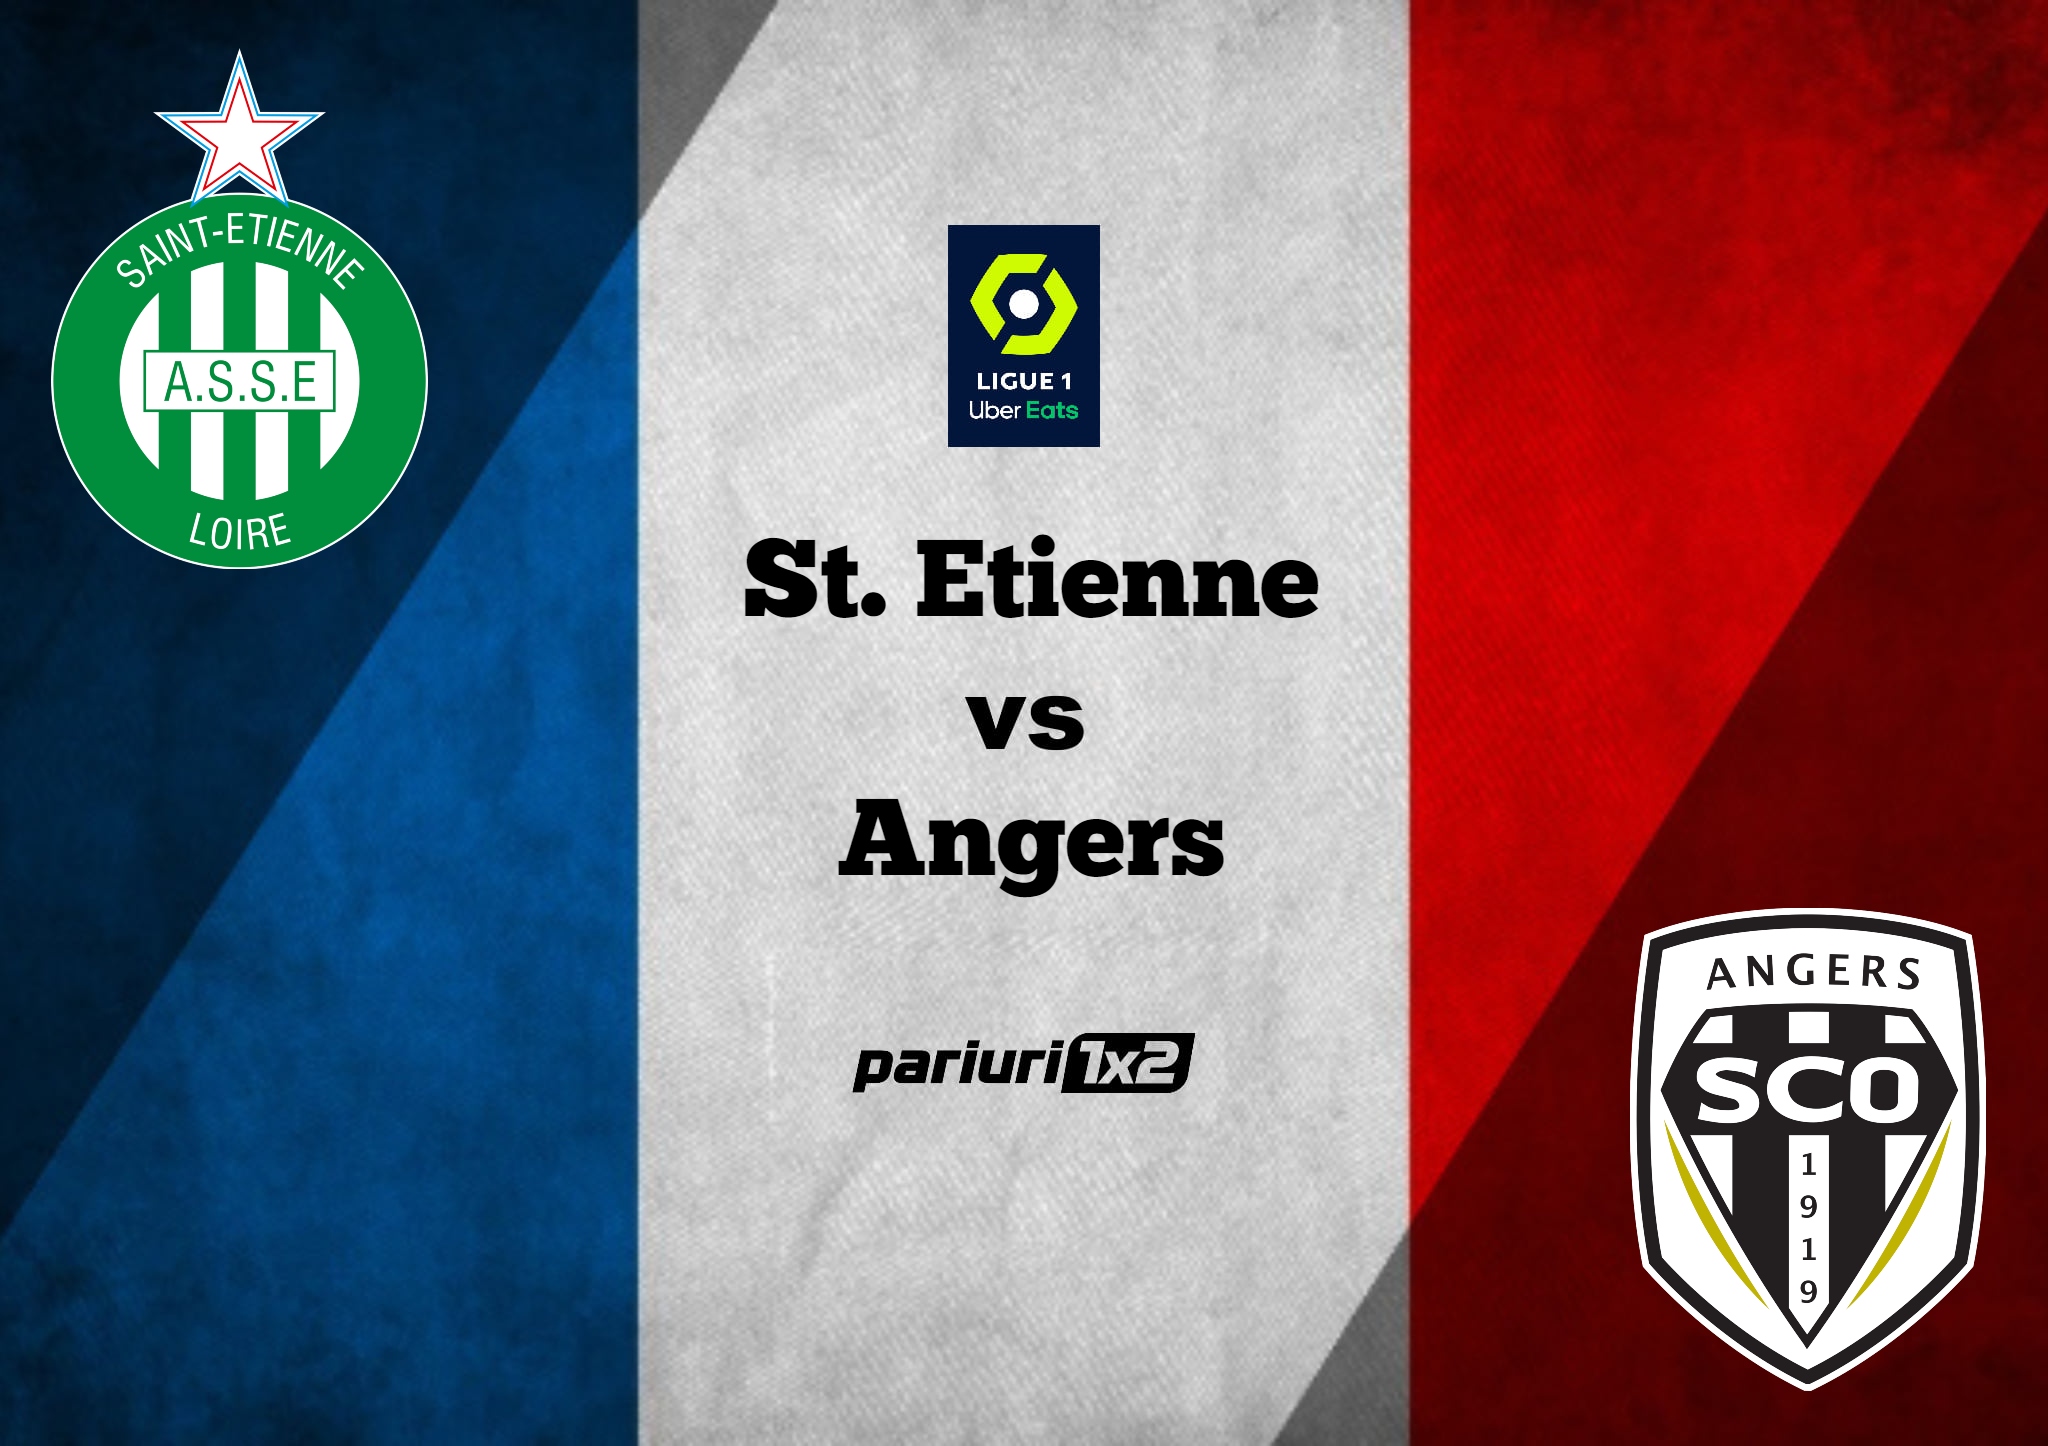 St. Etienne - Angers